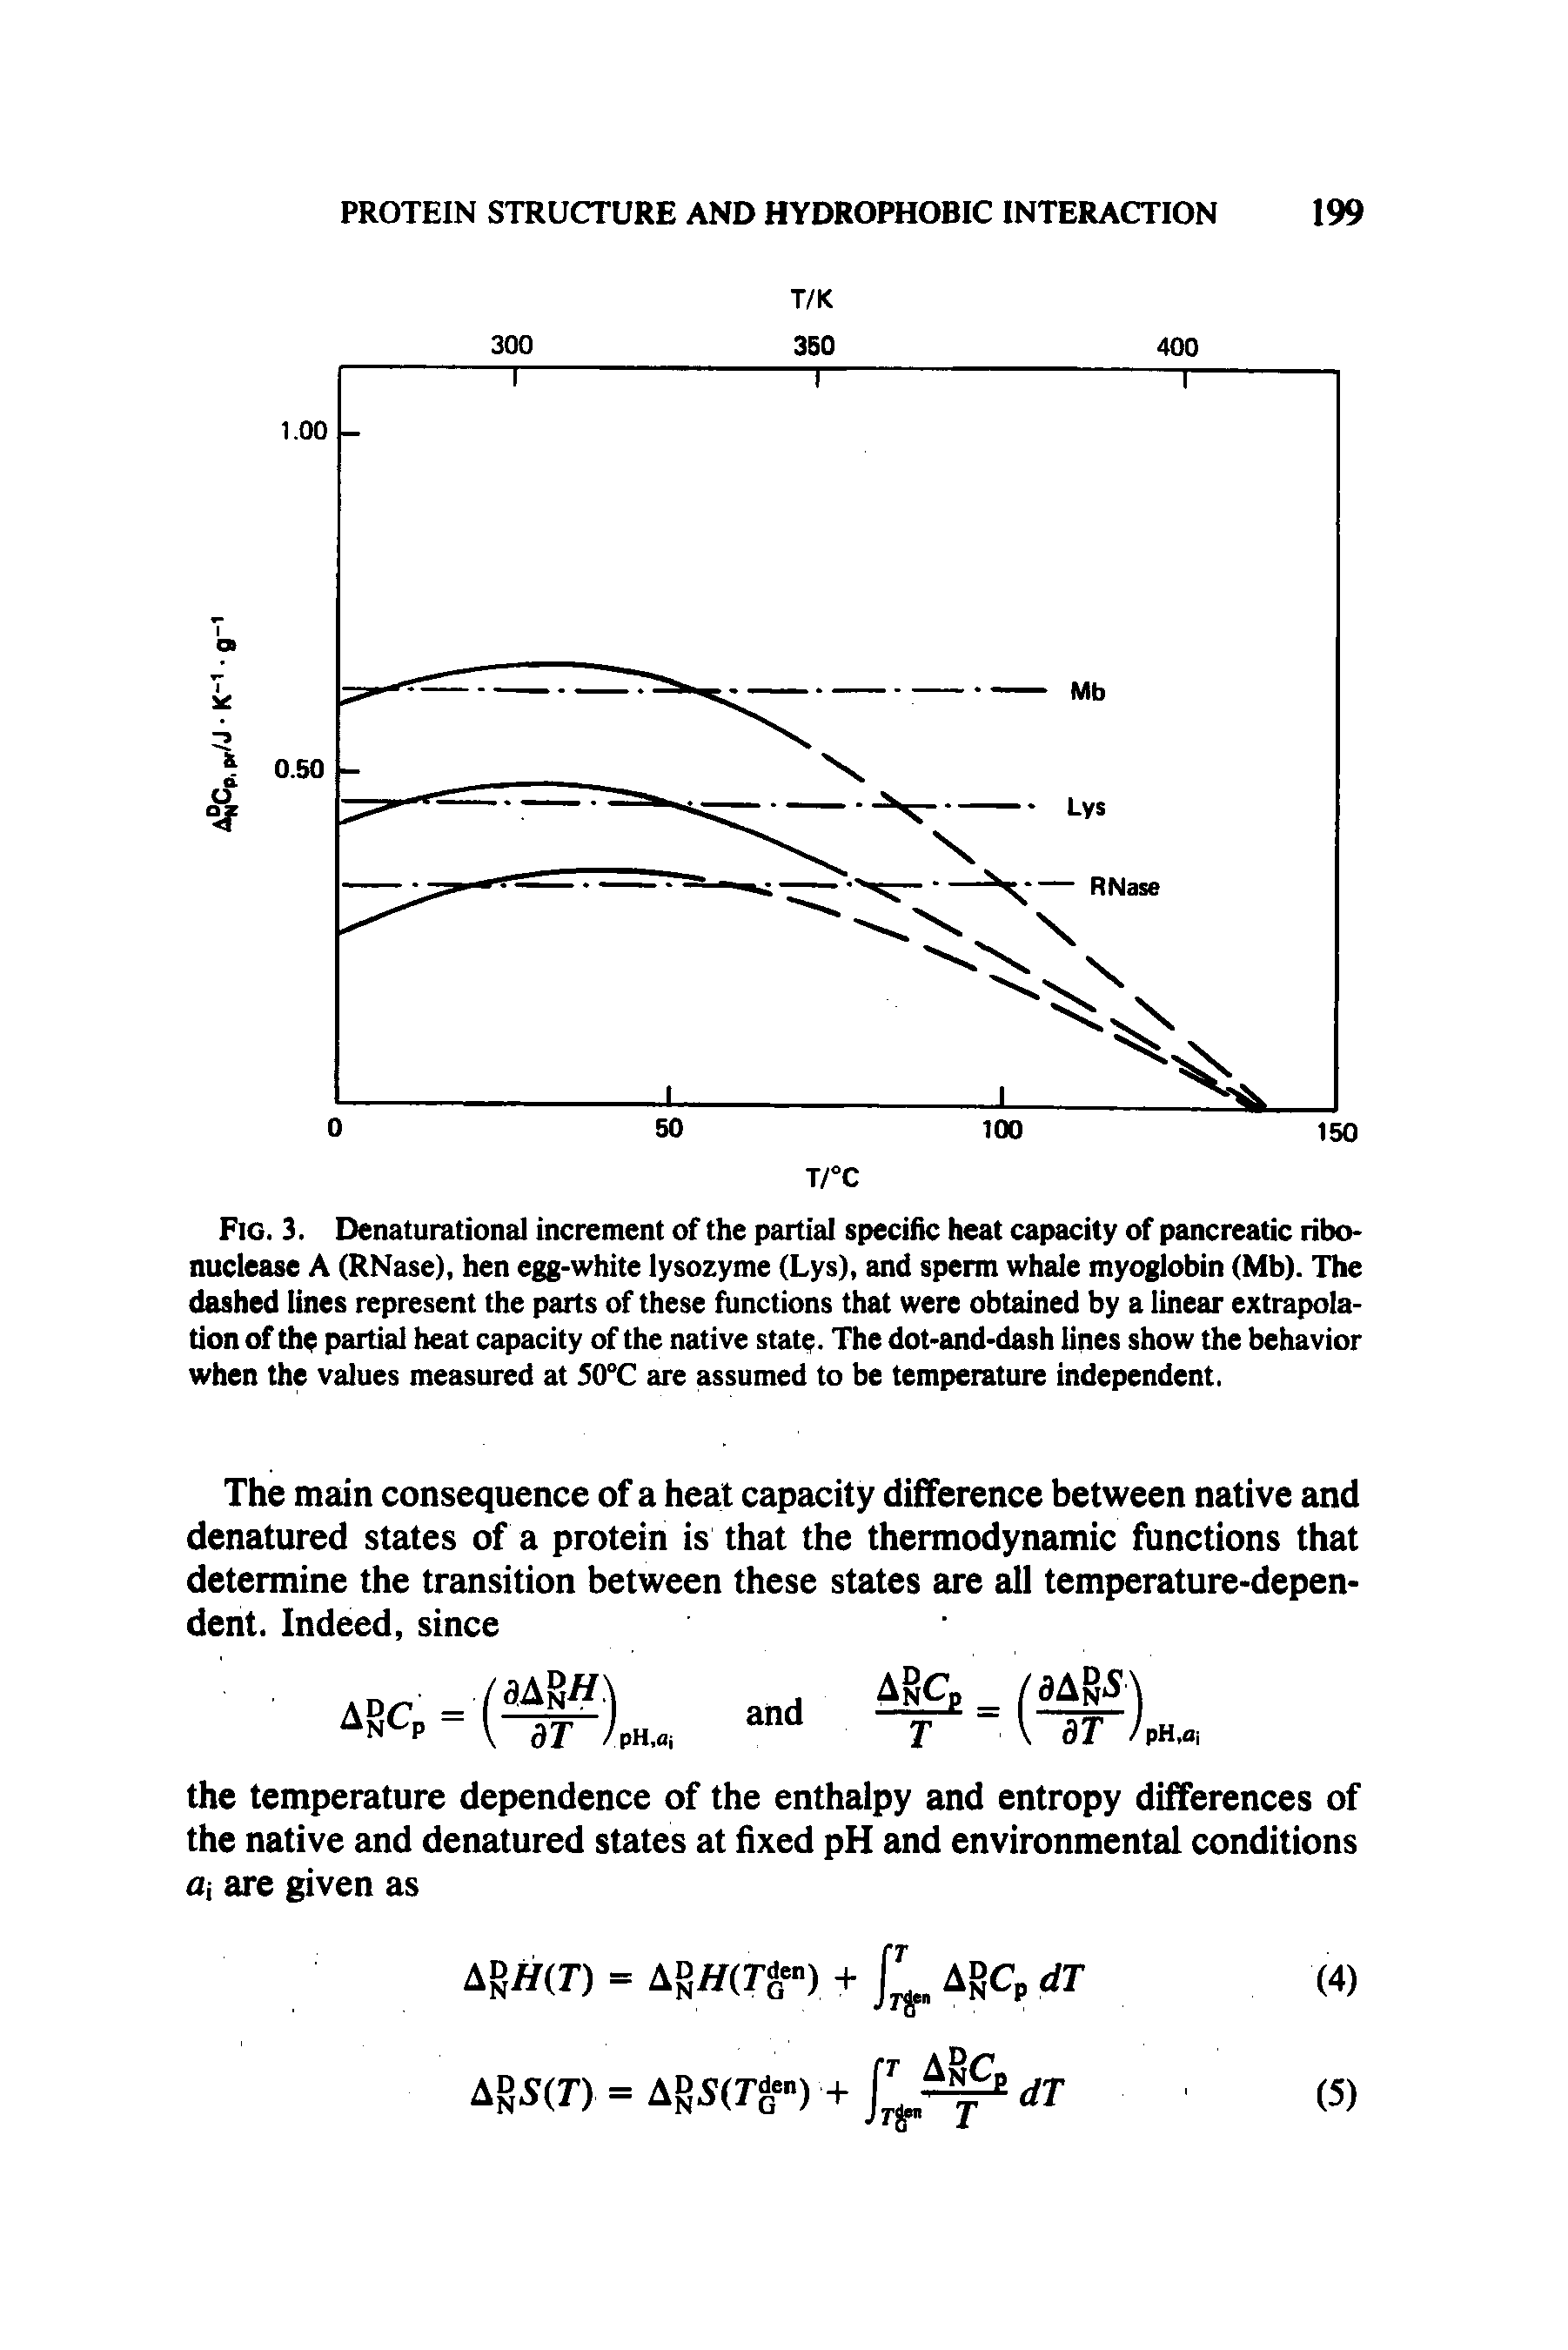 Fig. 3. Denaturational increment of the partial specific heat capacity of pancreatic ribo-nuclease A (RNase), hen egg-white lysozyme (Lys), and sperm whale myoglobin (Mb). The dashed lines represent the parts of these functions that were obtained by a linear extrapolation of th partial heat capacity of the native state. The dot-and-dash lines show the behavior when the values measured at 50°C are assumed to be temperature independent.